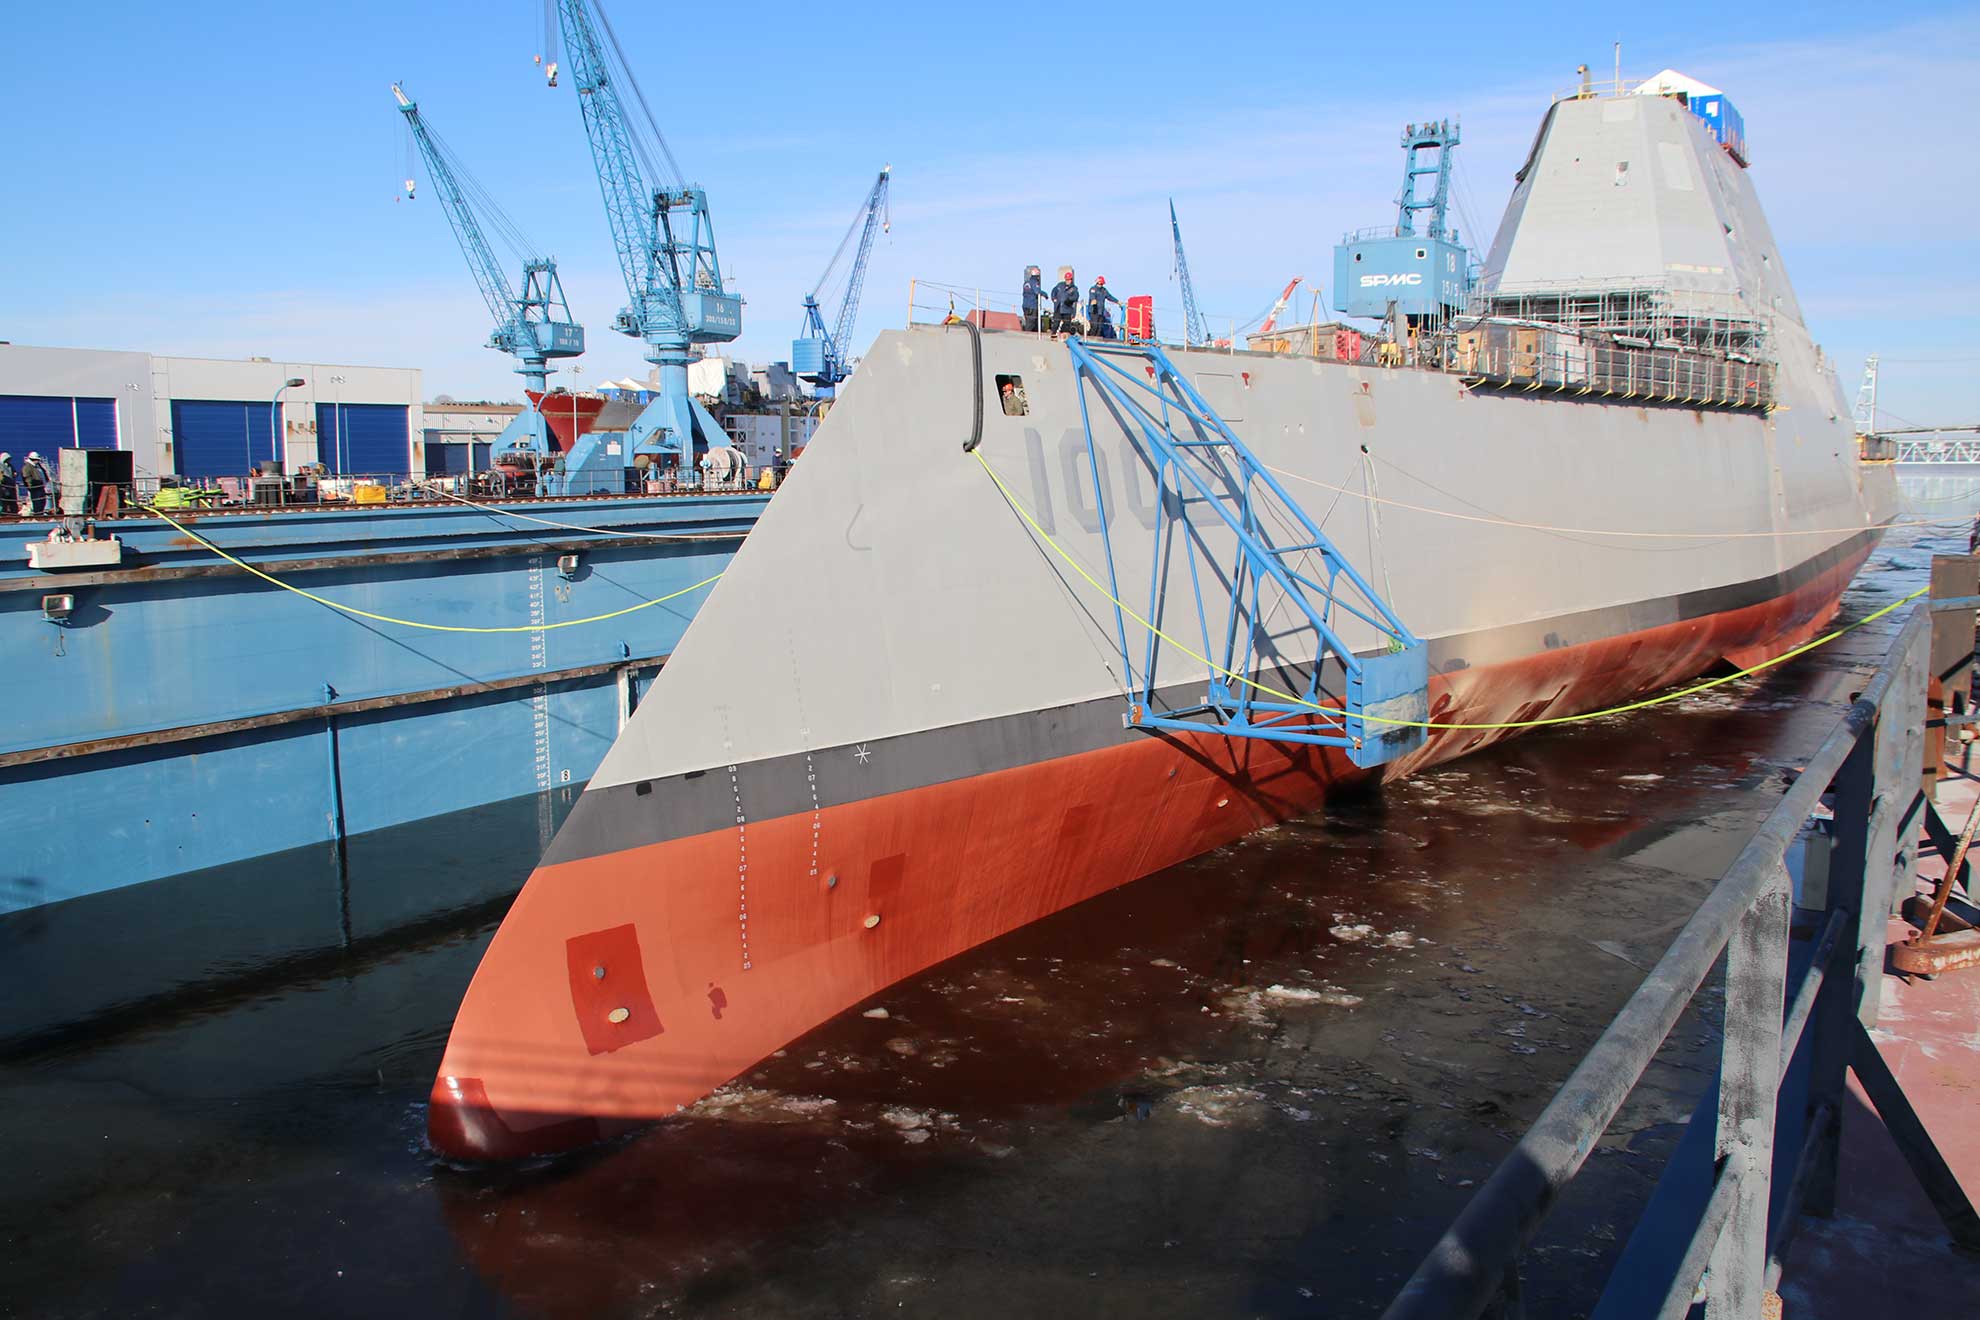 Bath, Maine (Dec. 9, 2018) Following a multi-day process that includes moving the ship from the land level facility to the dry dock, the future USS Lyndon B. Johnson (DDG 1002) is made ready before flooding of the dry dock at General Dynamic-Bath Iron Works shipyard, and subsequent launching of the third Zumwalt-class destroyer -- U.S. Navy photo courtesy of General Dynamics-Bath Iron Works. -